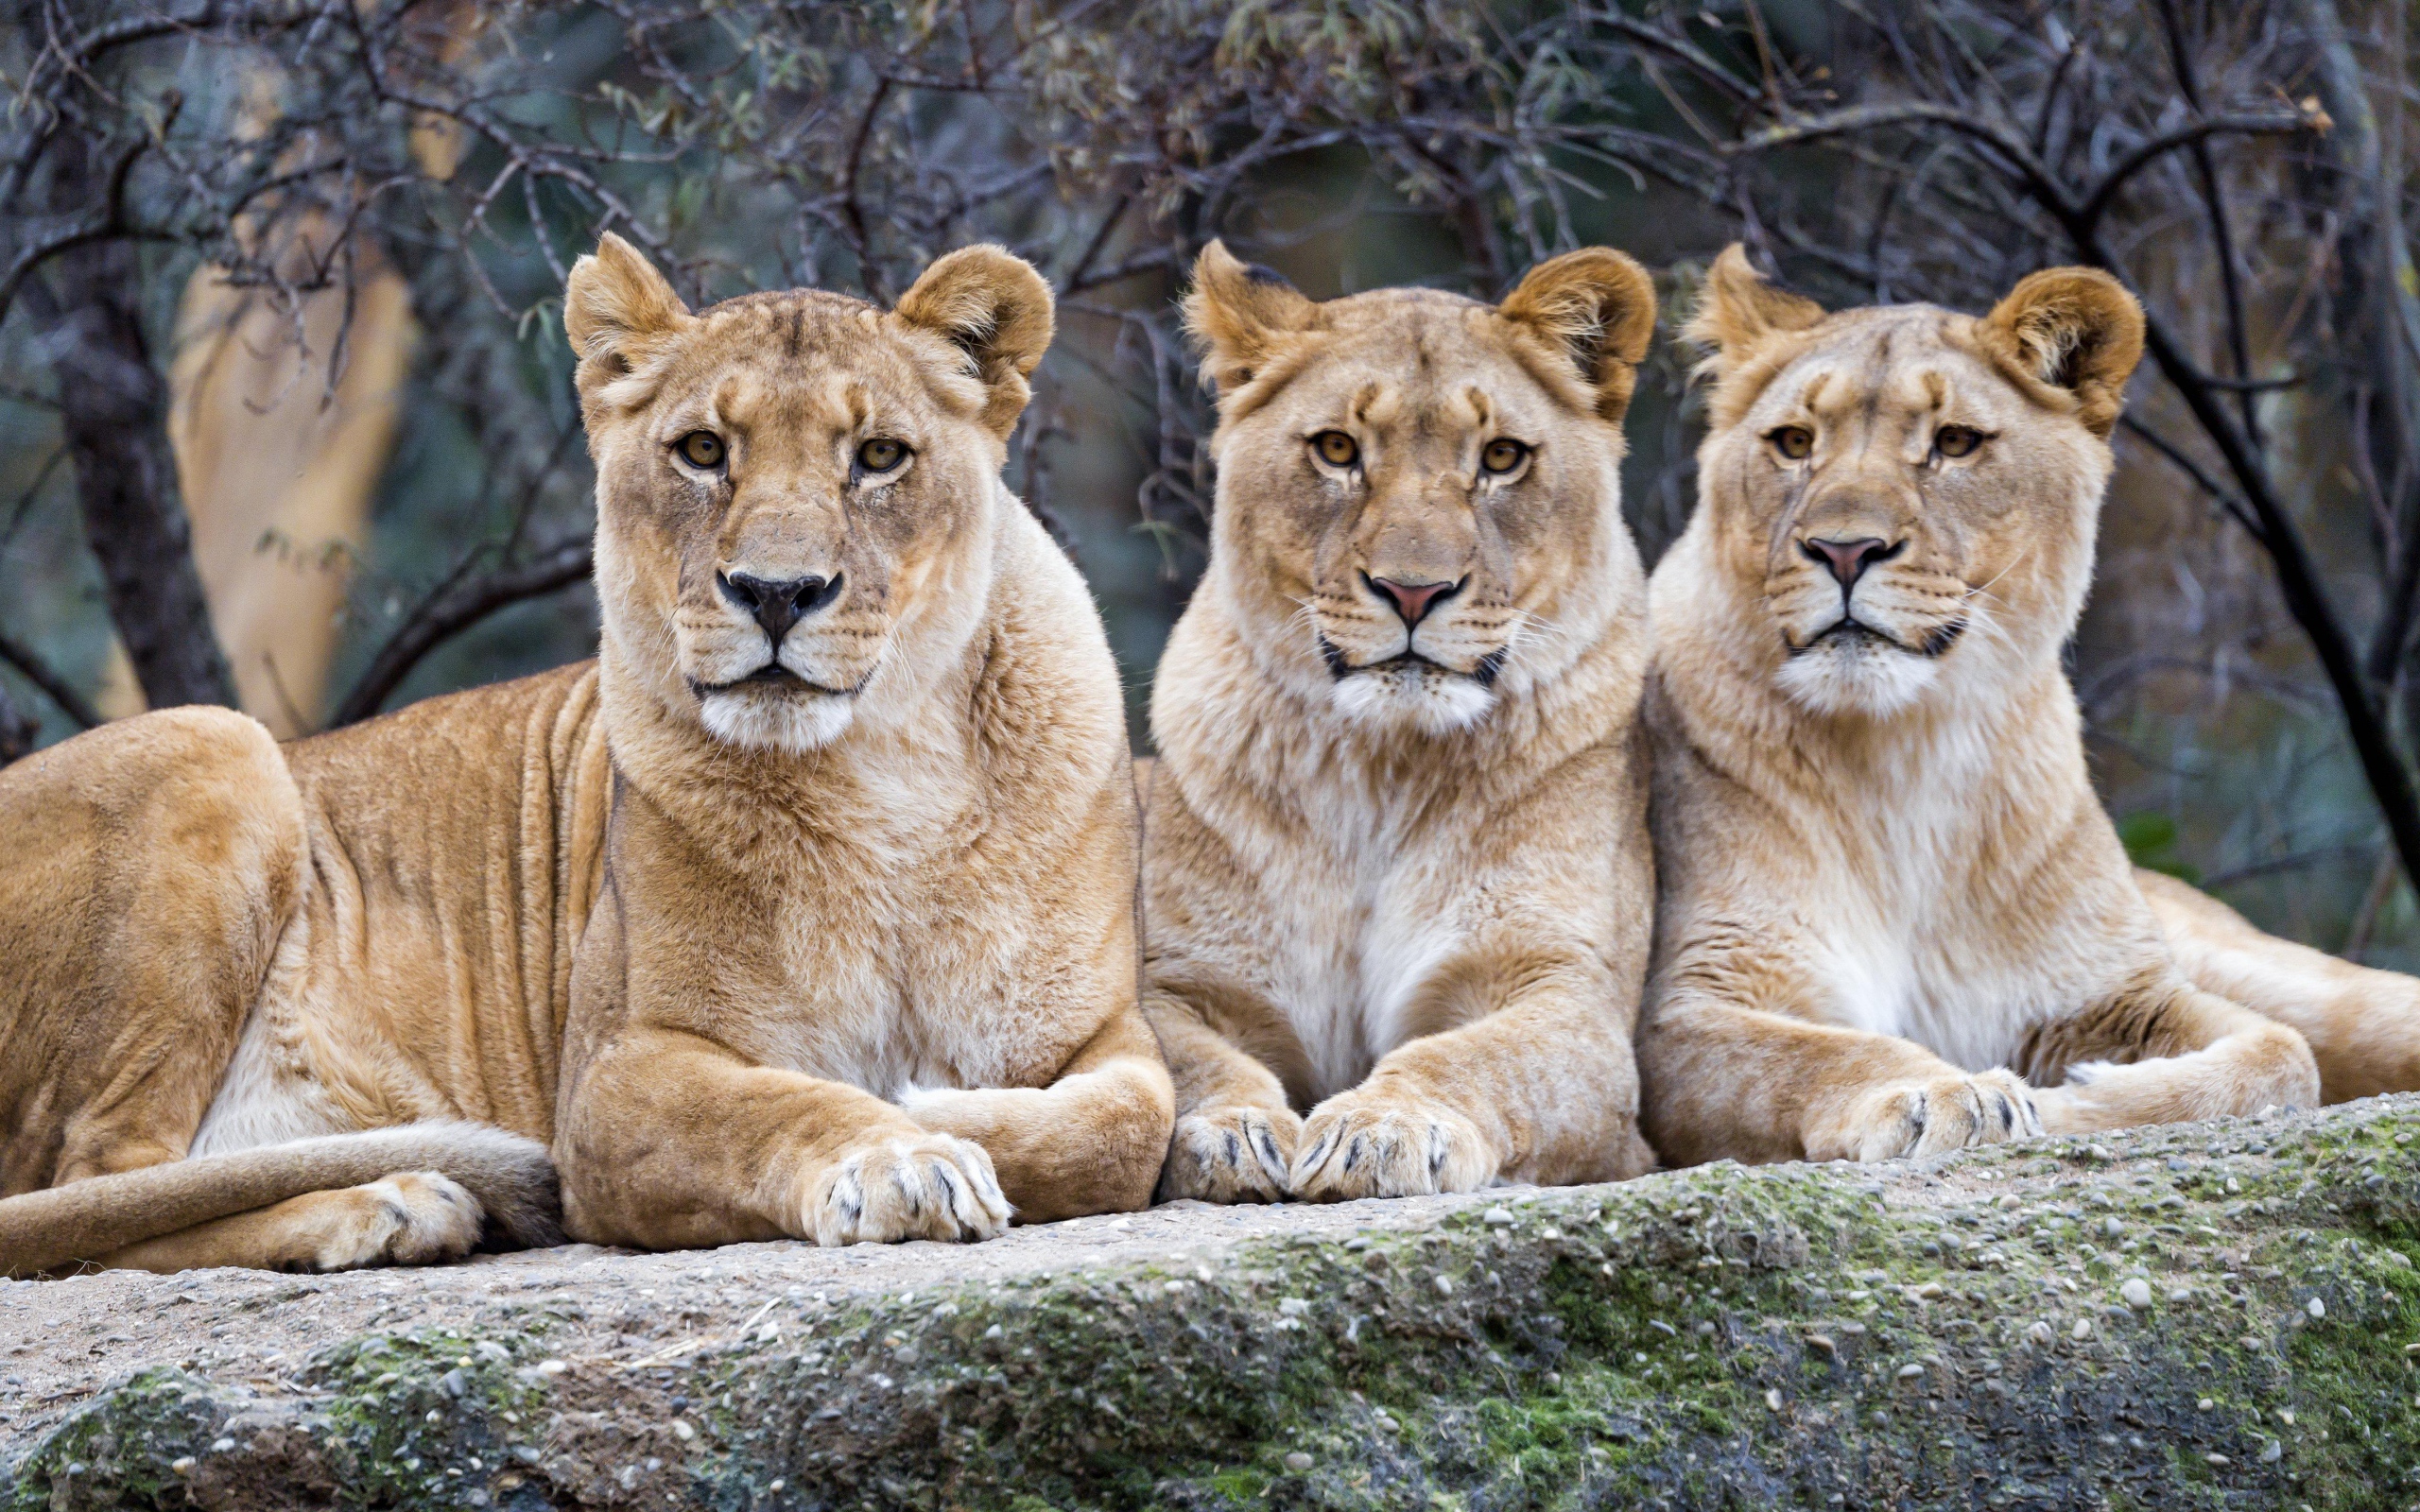 Three big lionesses lie on a stone in a zoo